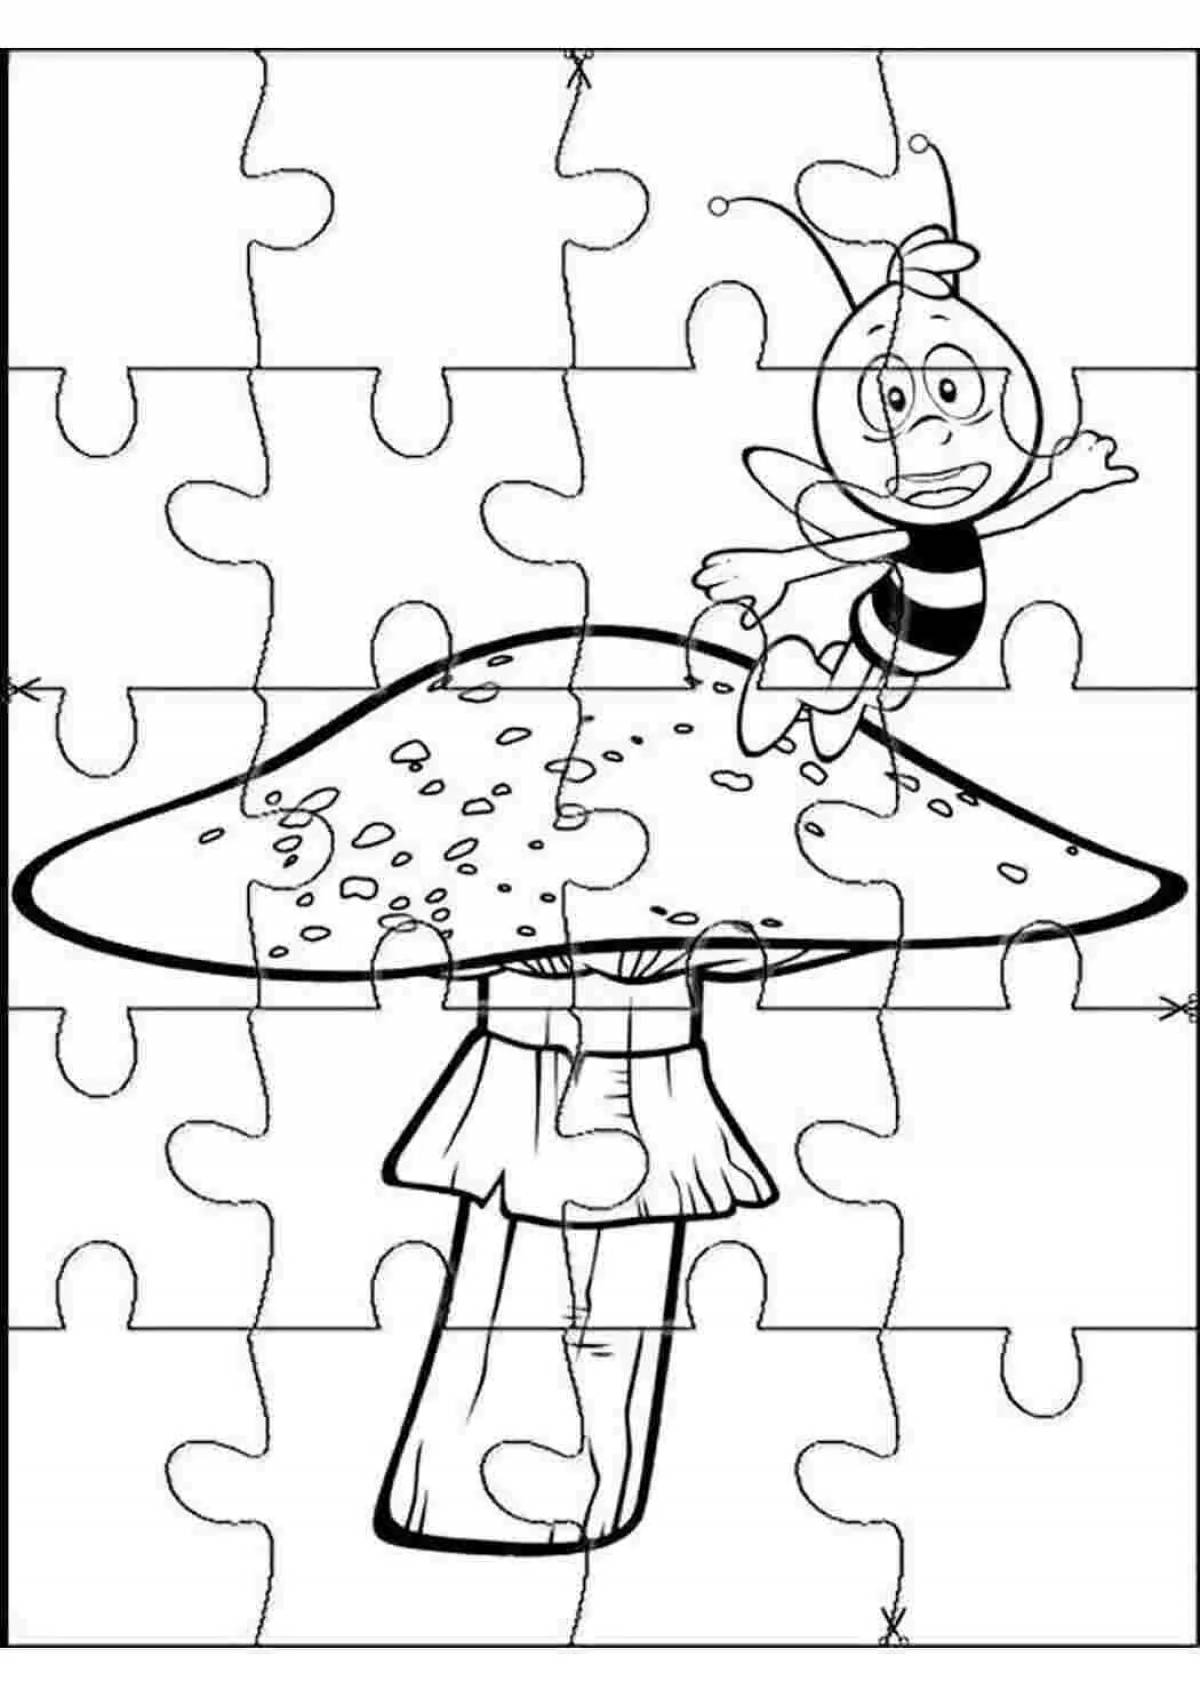 Invigorating coloring in games for children 5 years old puzzles